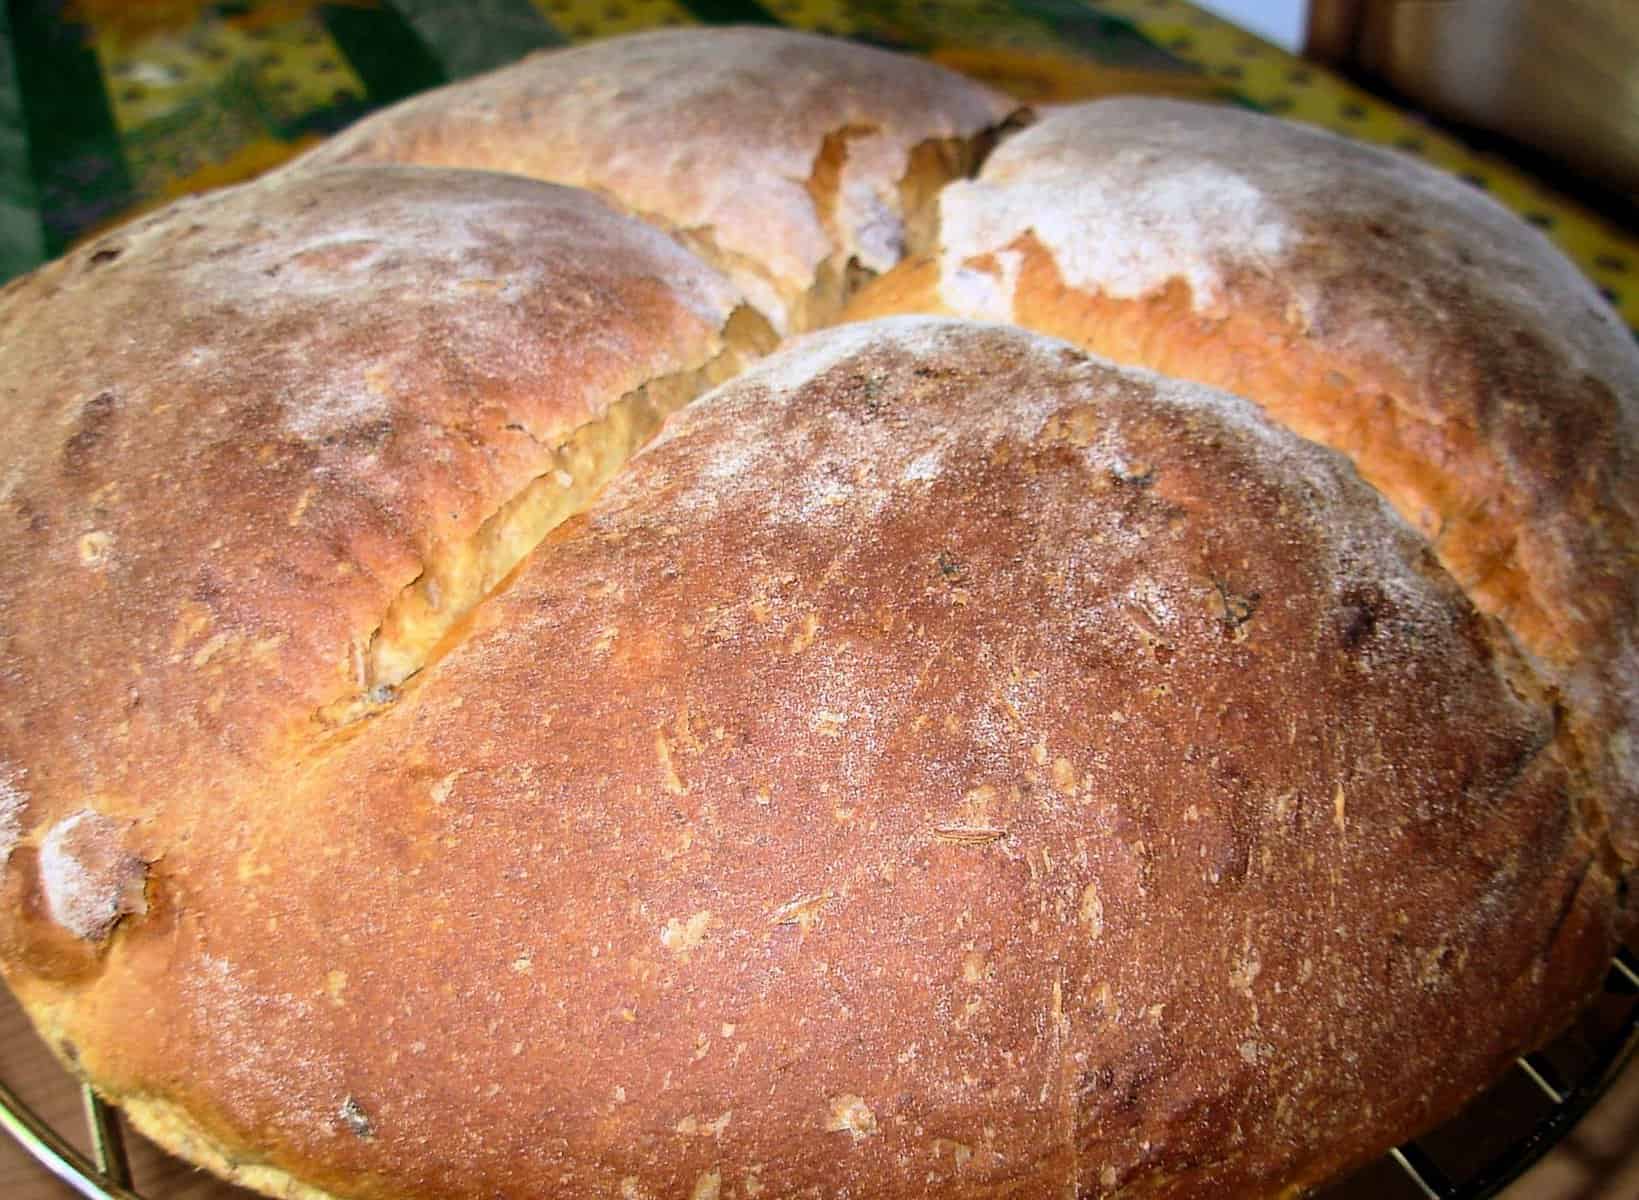  Freshly baked olive-rosemary bread, hot out of the oven